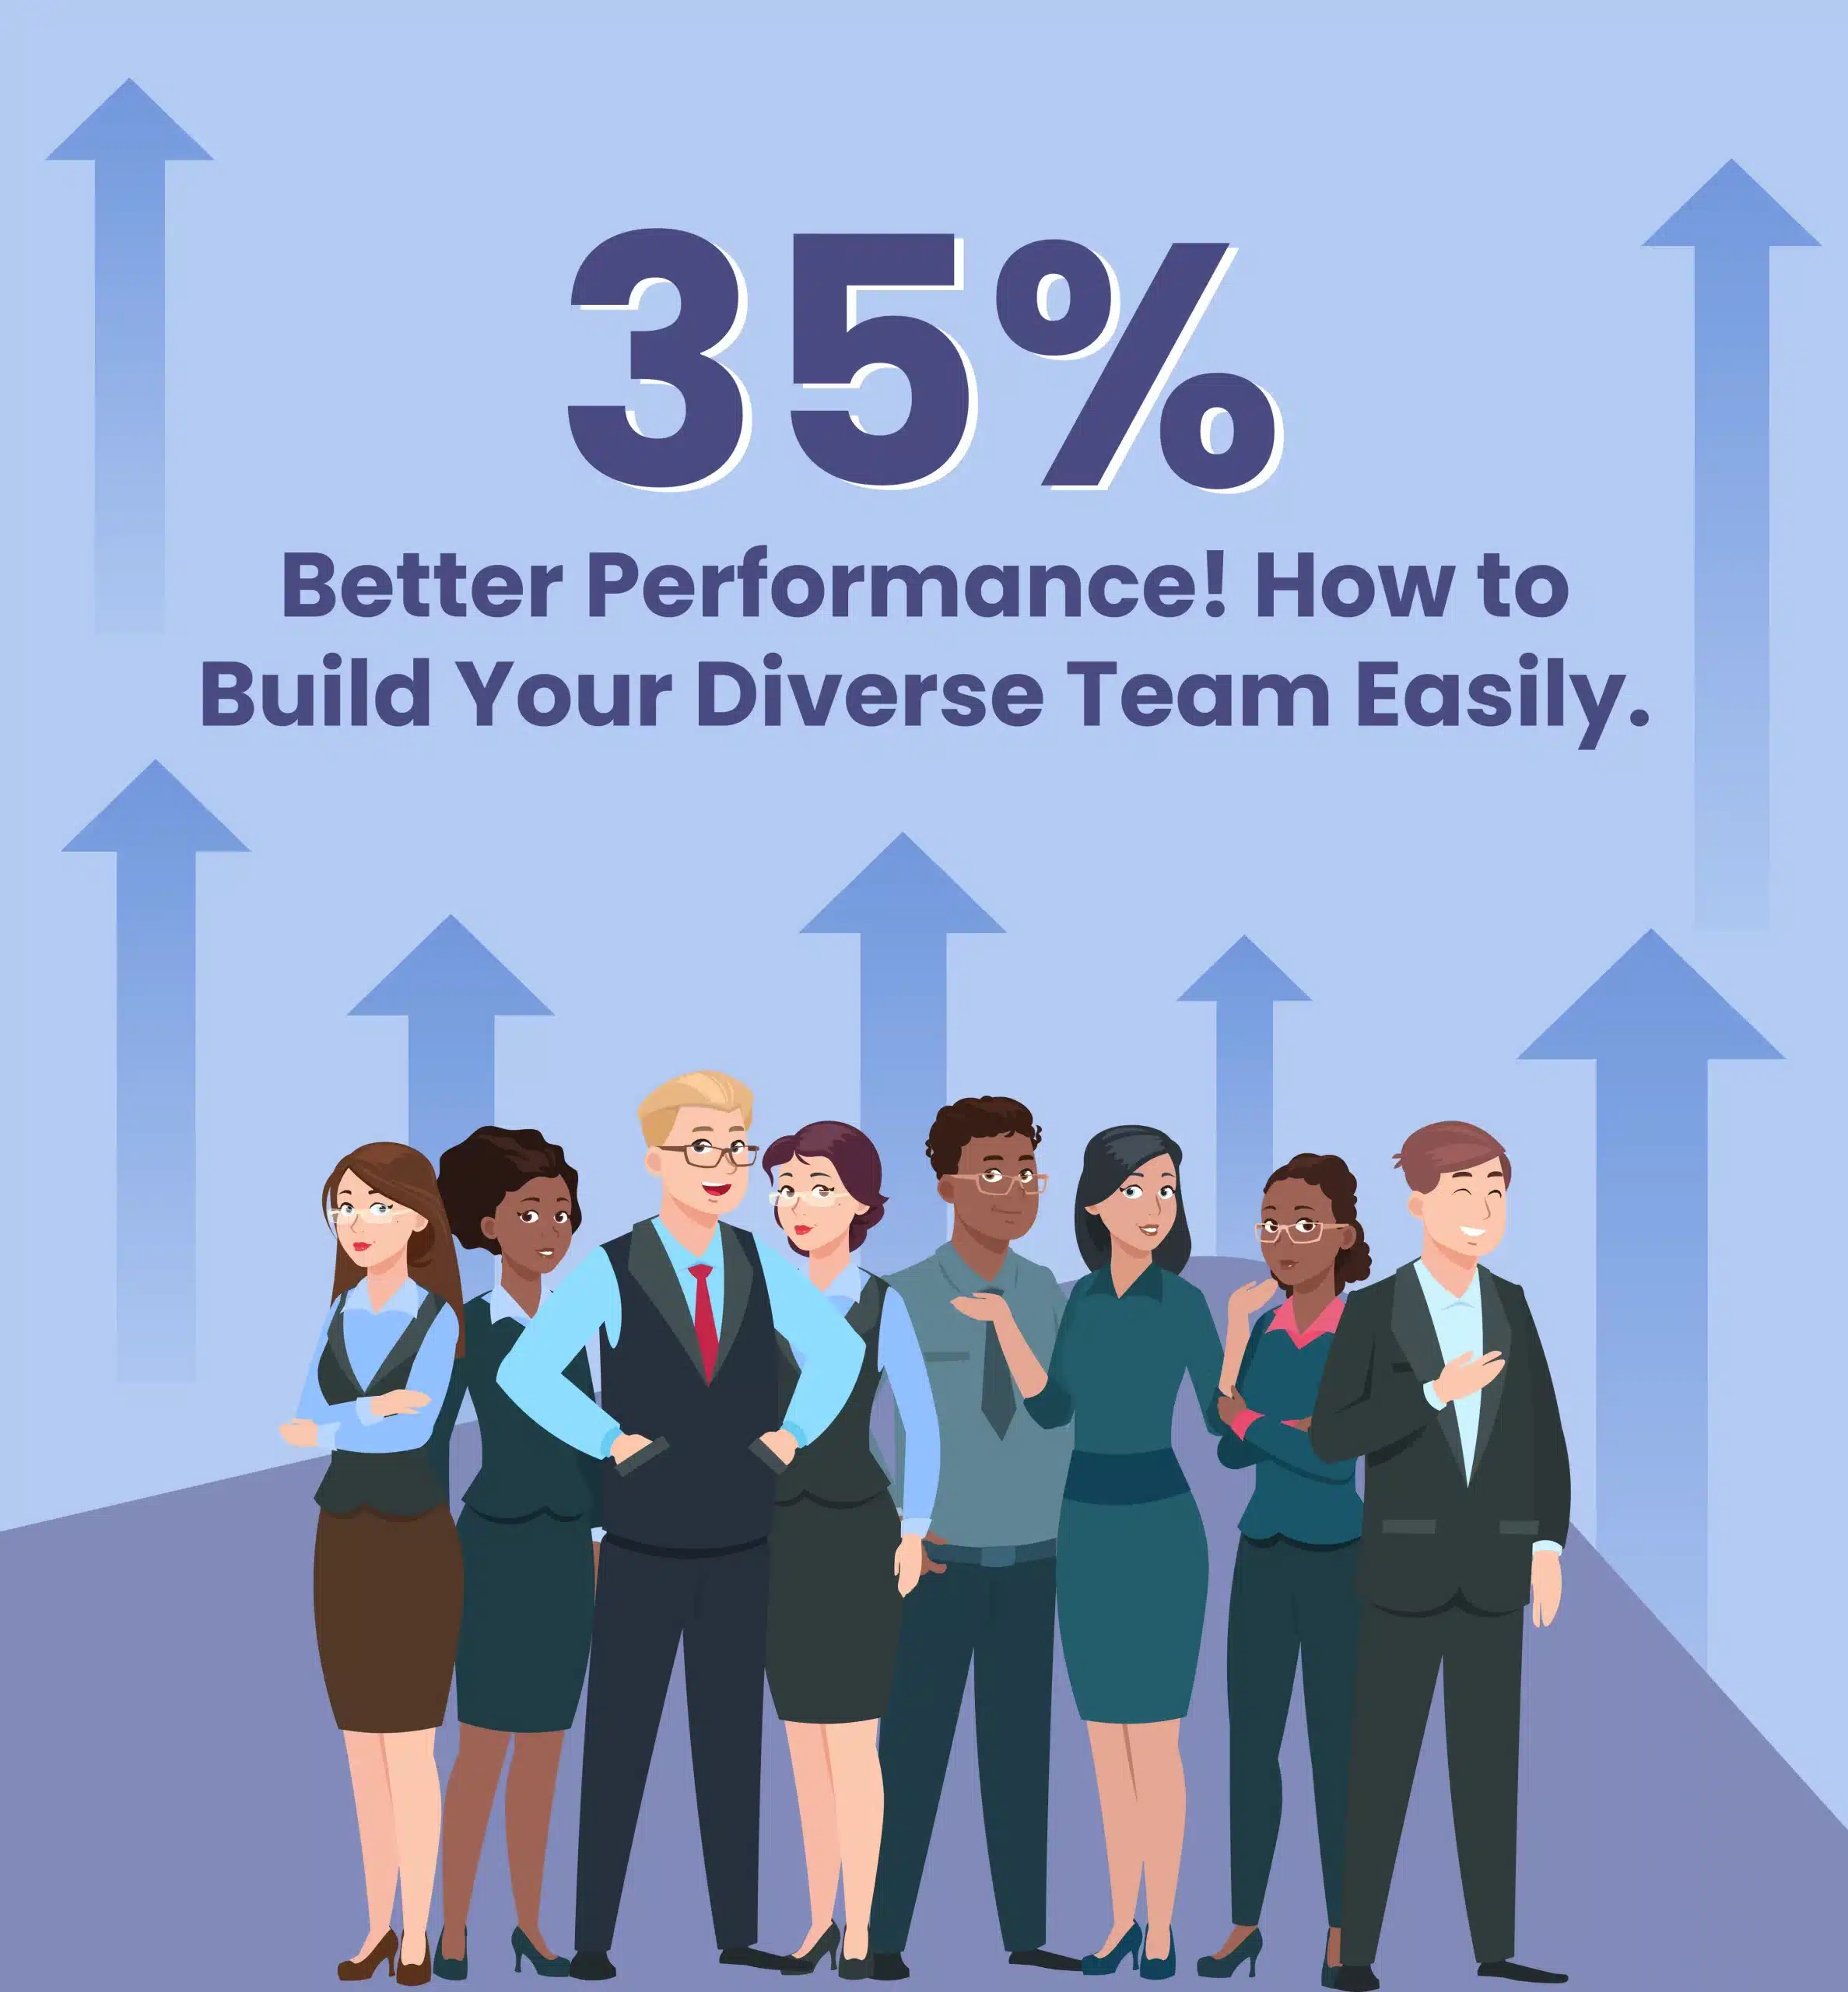 35% Better Performance! How to Build Your Diverse Team Easily.